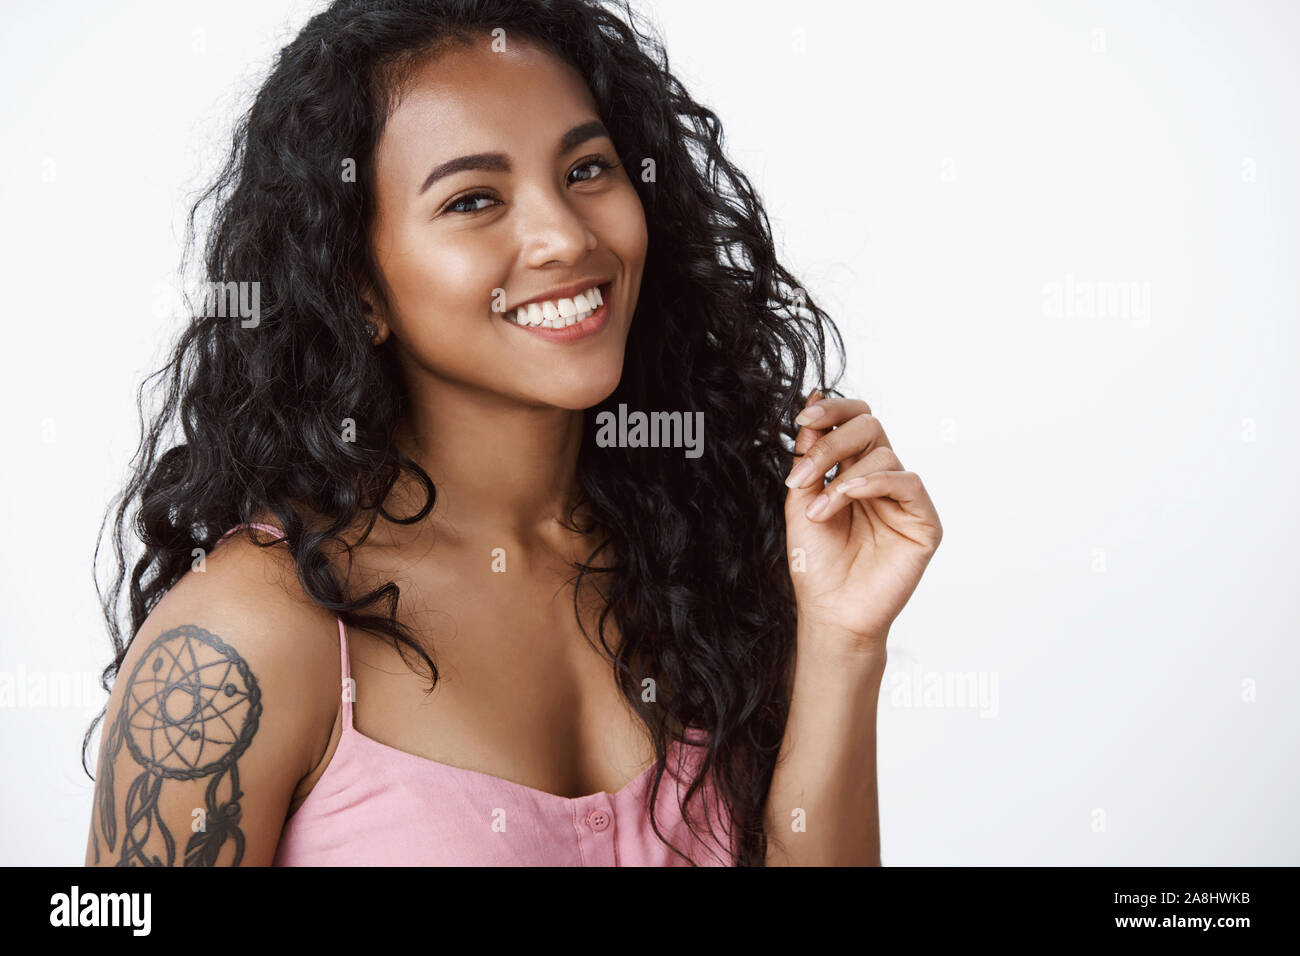 Closeup Attractive Grateful Charming Africanamerican Curlyhaired Girl  with Tattoos Hold Hands in Pray Smiling Toothy Stock Image  Image of  expression female 164046299